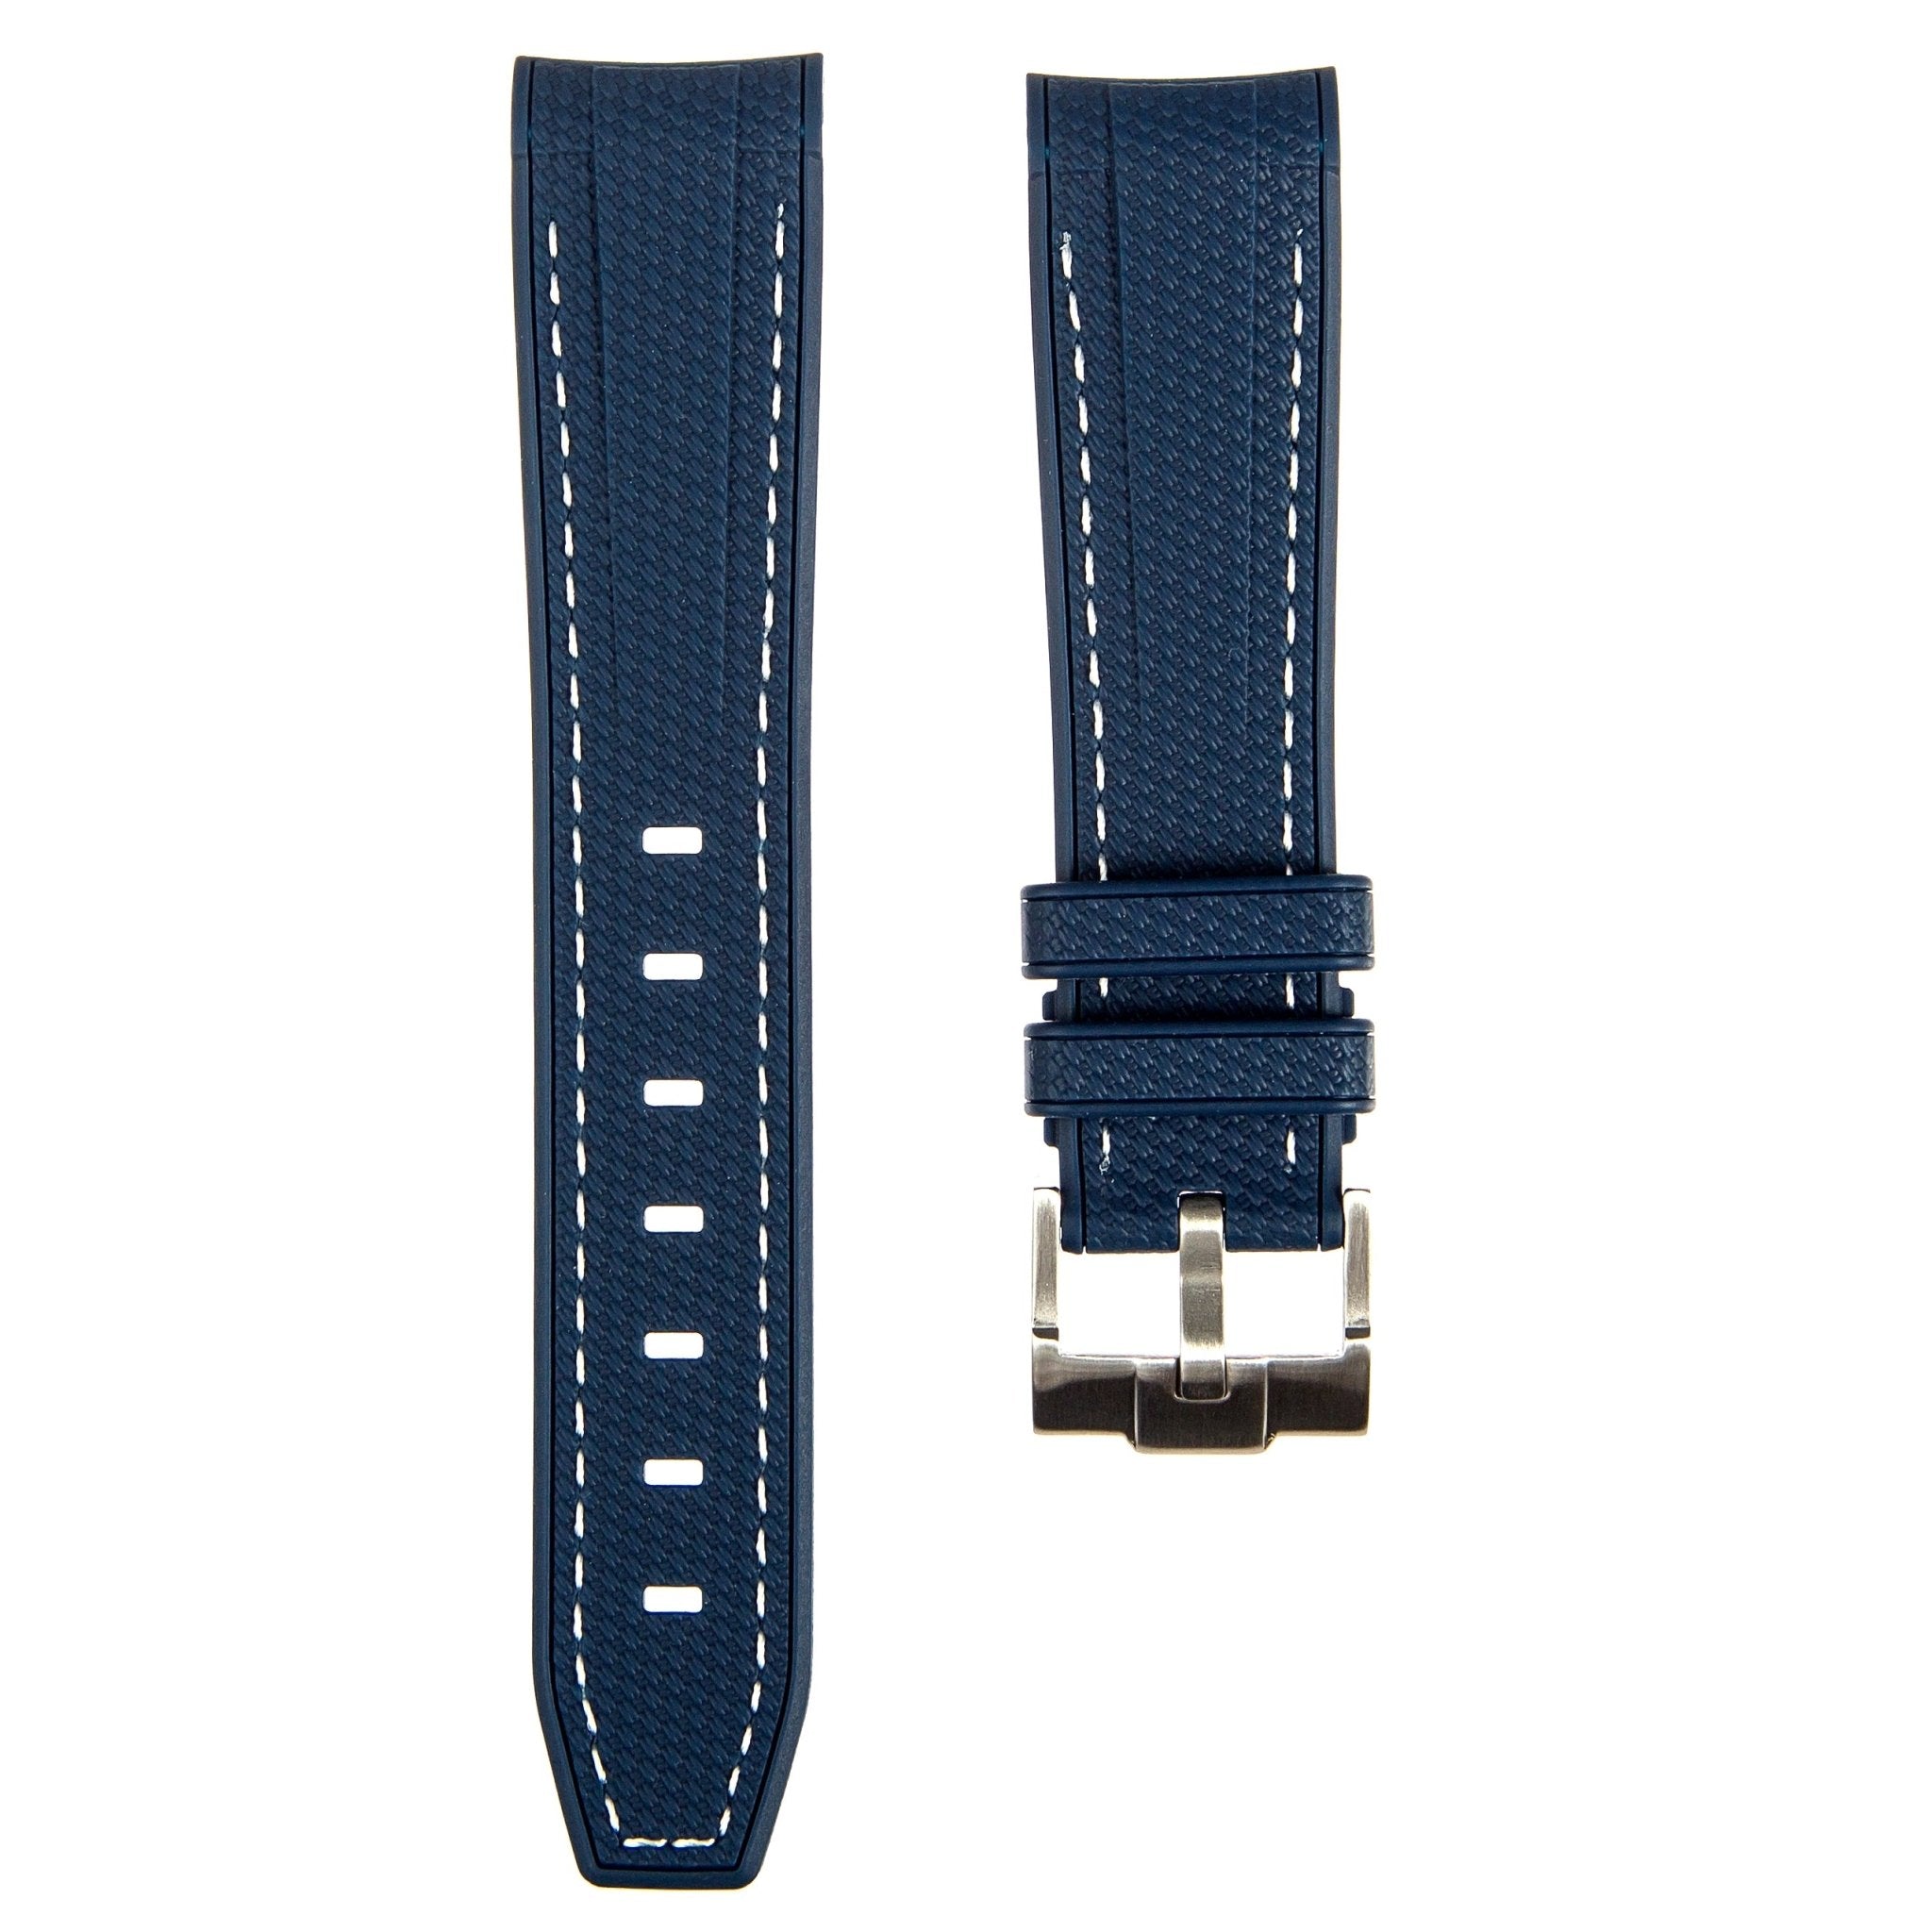 Textured Curved End Premium Silicone Strap - Navy with White Stitch (2405) -StrapSeeker